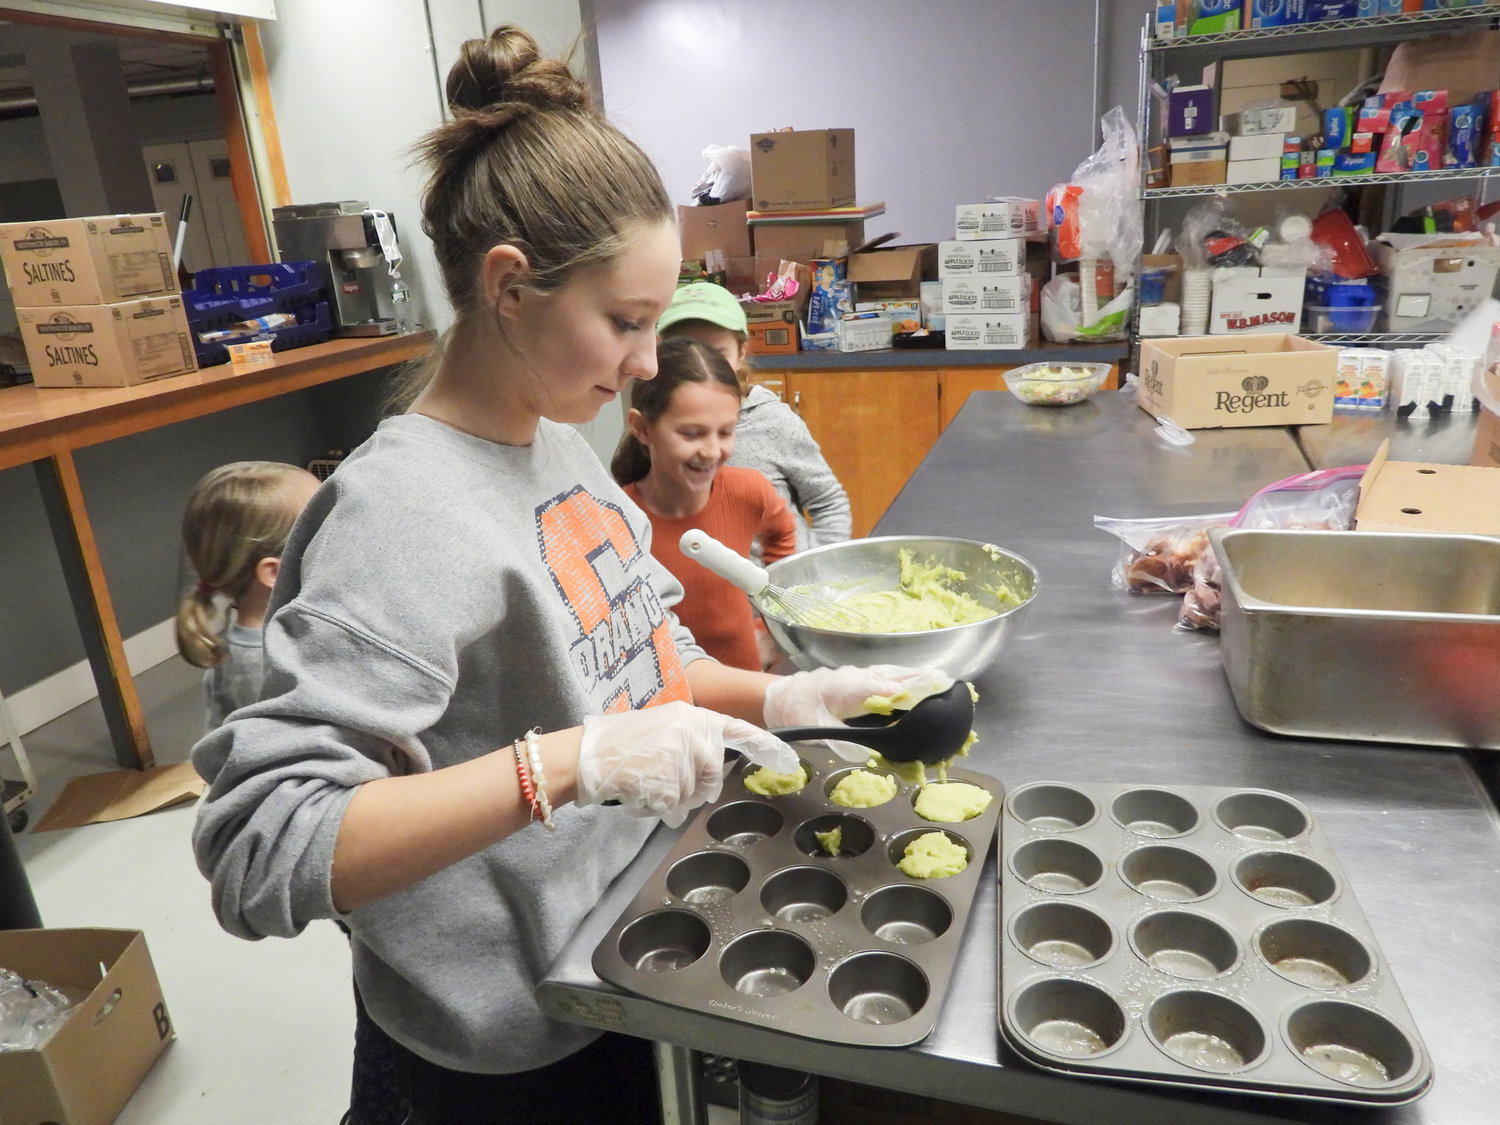 Youth volunteers from Our Lady of Good Counsel in Verona work to assemble meals at Karing Kitchen on Thursday, Feb. 23. Pictured is Kaitlyn Grems, 13, of Durhamville, who attends Holy Cross Academy. Students are currently on mid-winter vacation